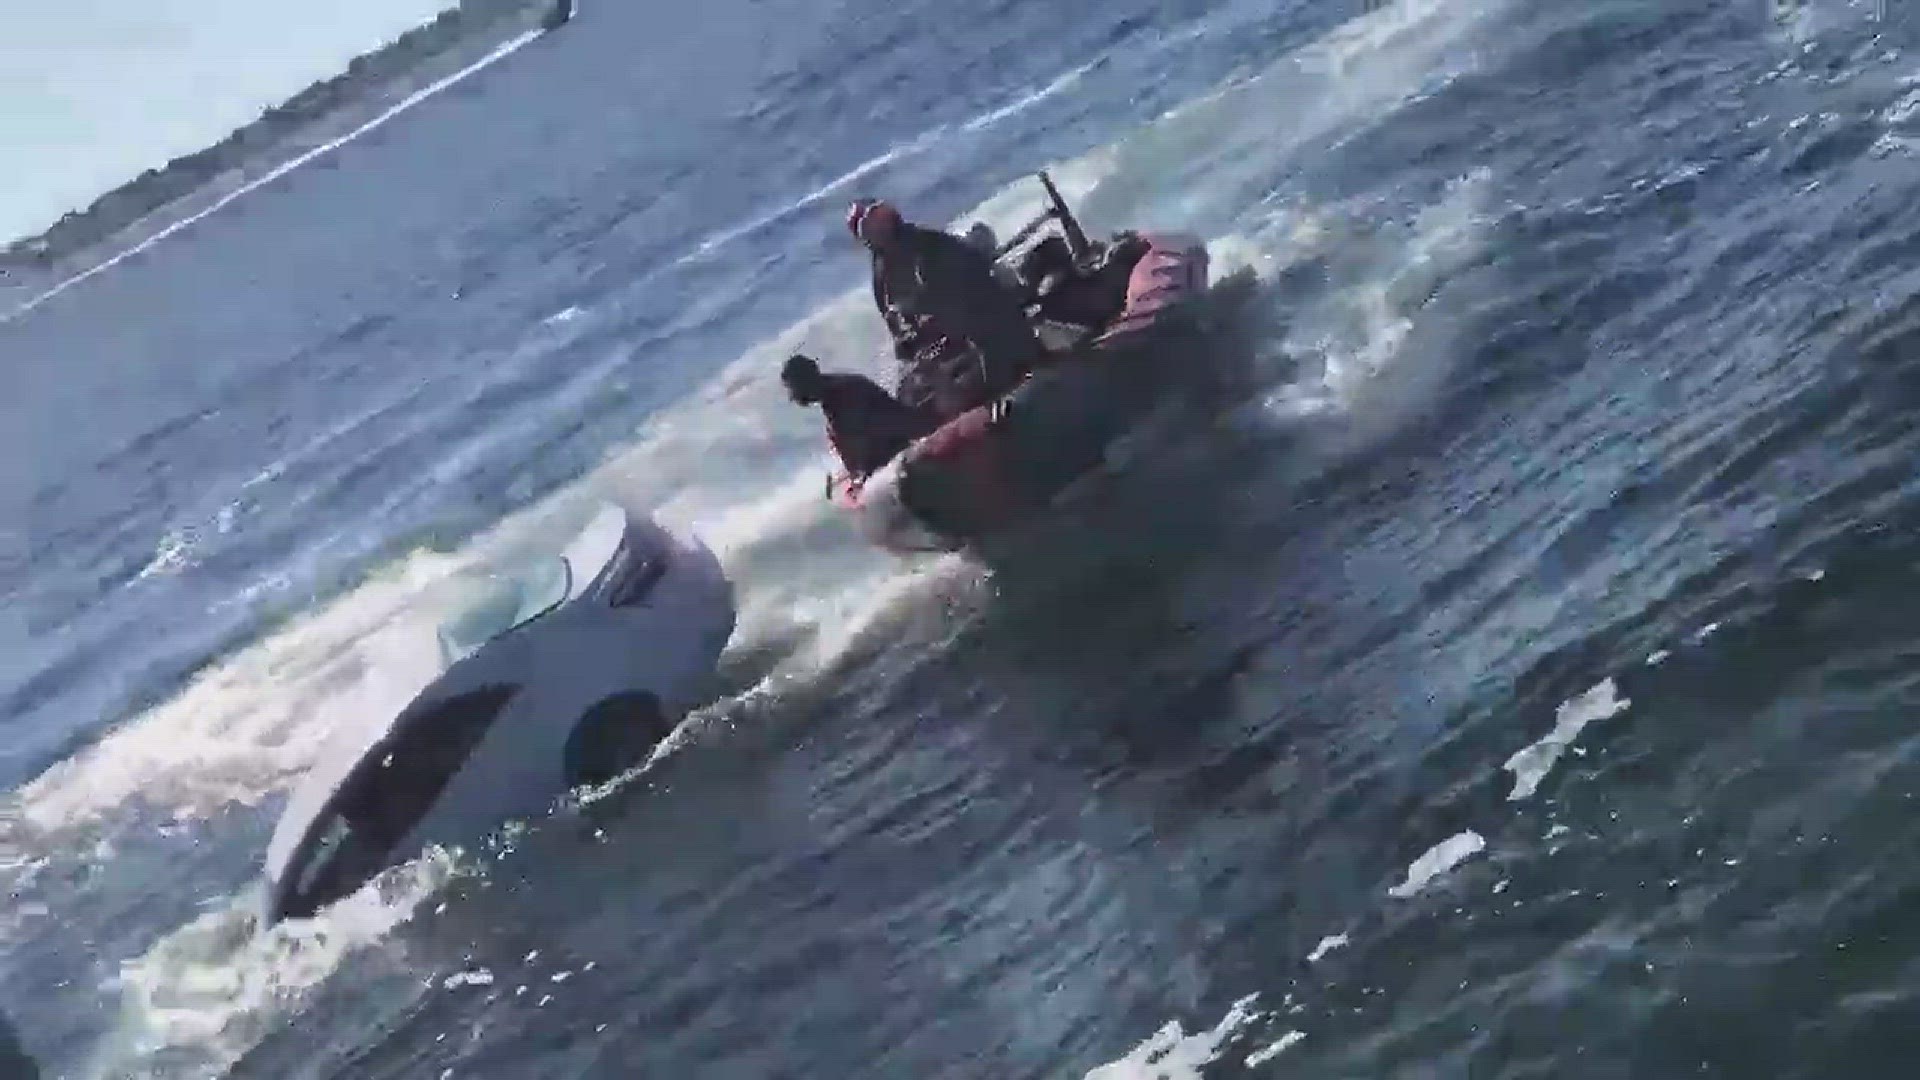 VIDEO: Coast Guard rescues elderly man after car plunges into marina